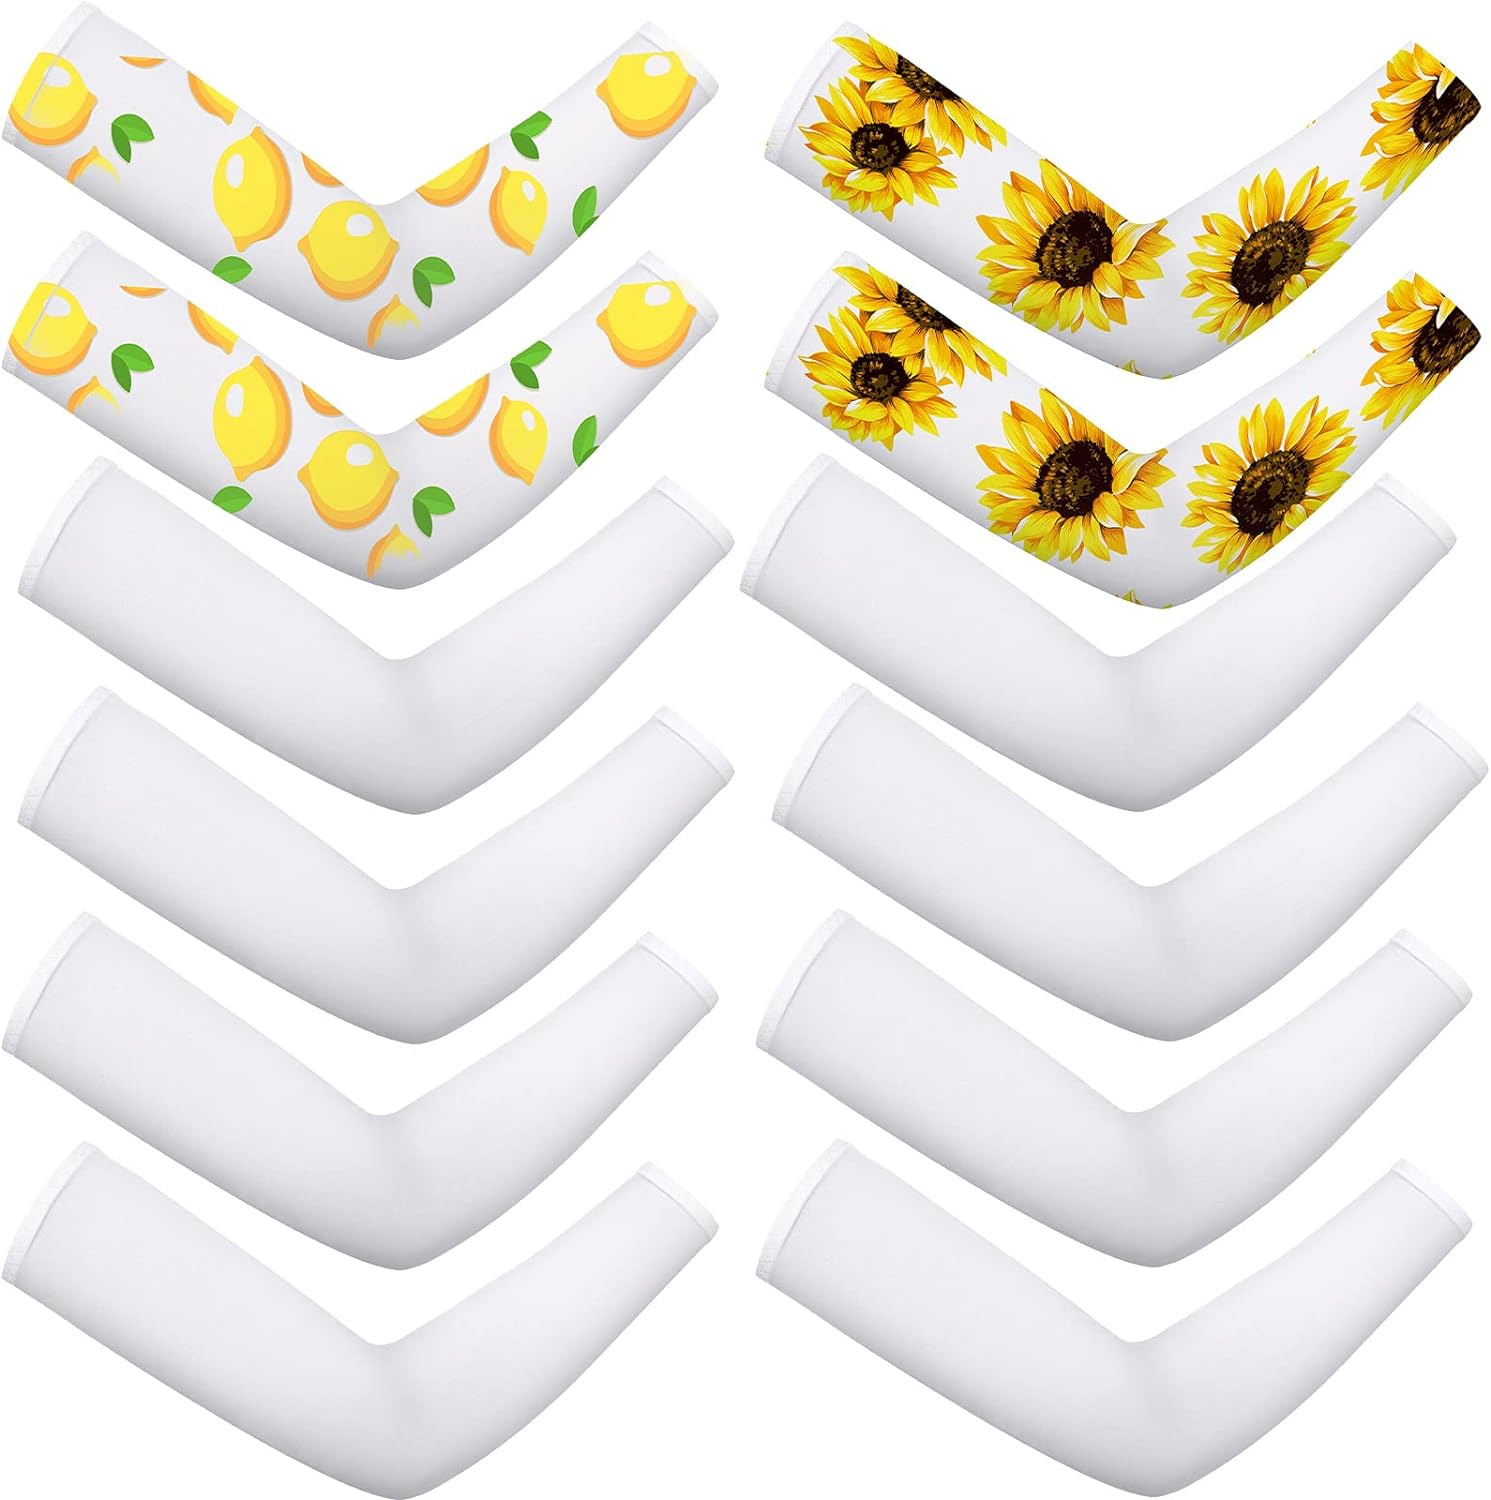 6 Pairs Sublimation Blank Cooling Arm Sleeves, Sublimation UV Protection Sleeves